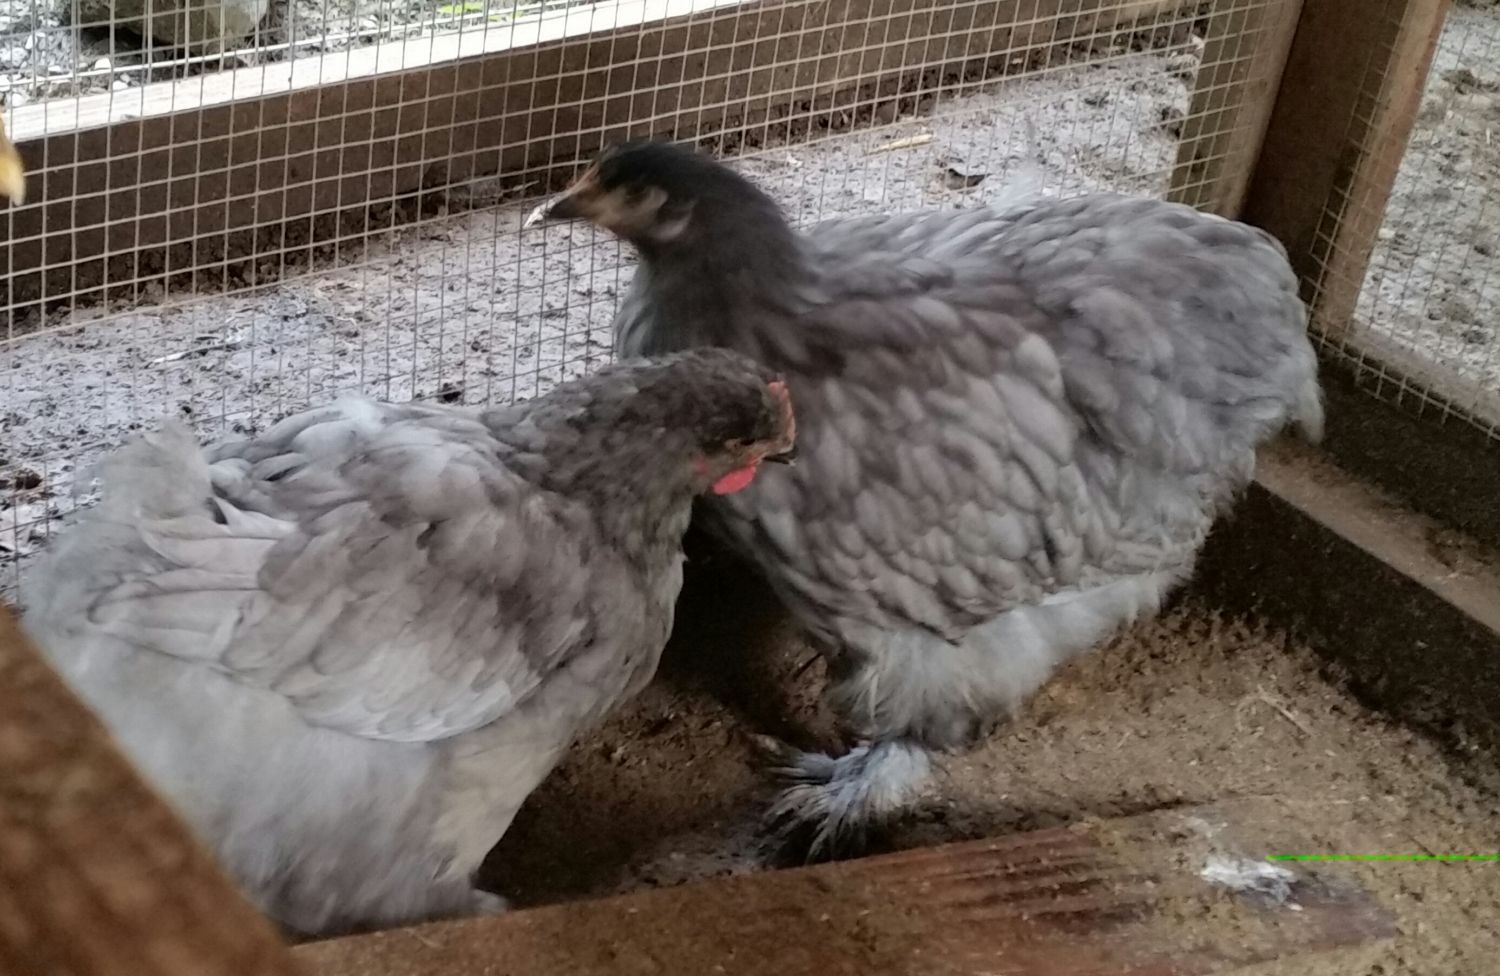 IMG    Hello! so happy to have found this thread!!Here are my blue chicks. I have 5 LF chicks and one LF adult hen that I hope to get in my new coop soon.